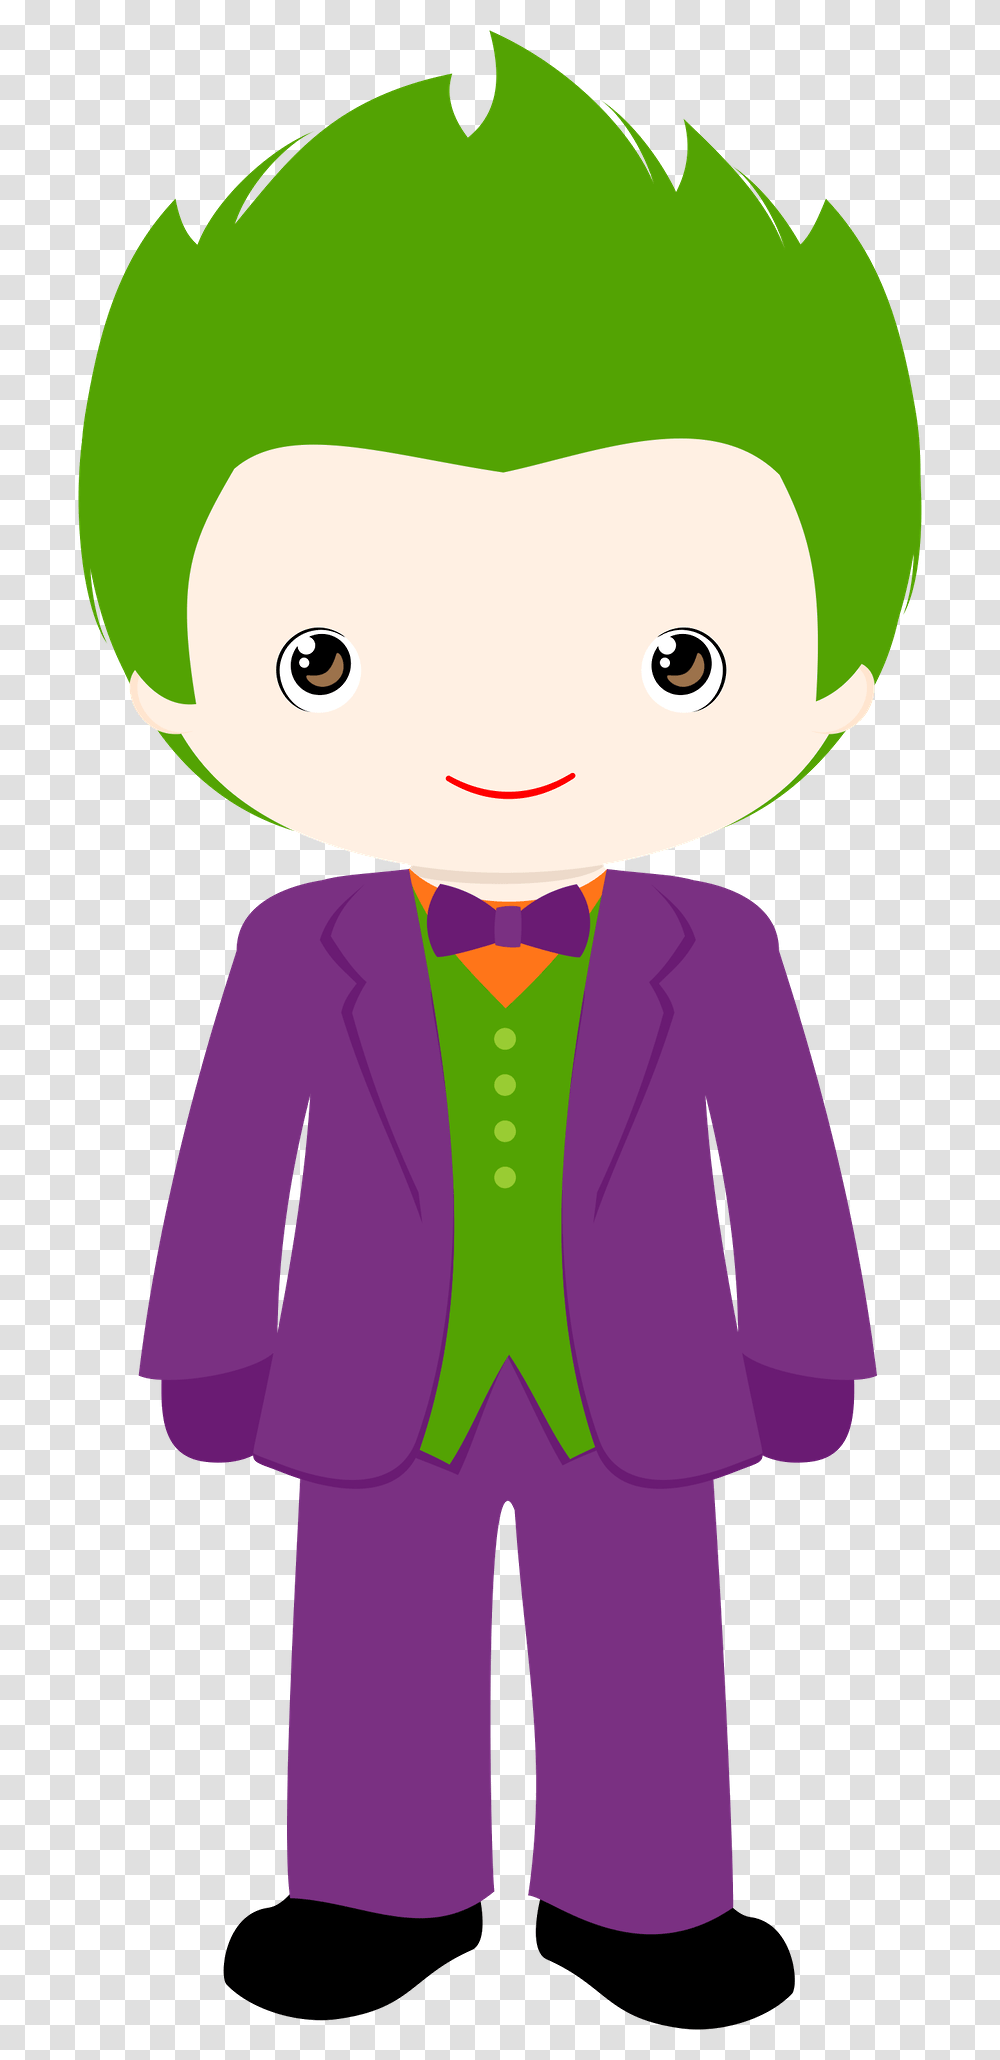 The Cute Images Joker Clipart, Tie, Accessories, Accessory, Doll Transparent Png